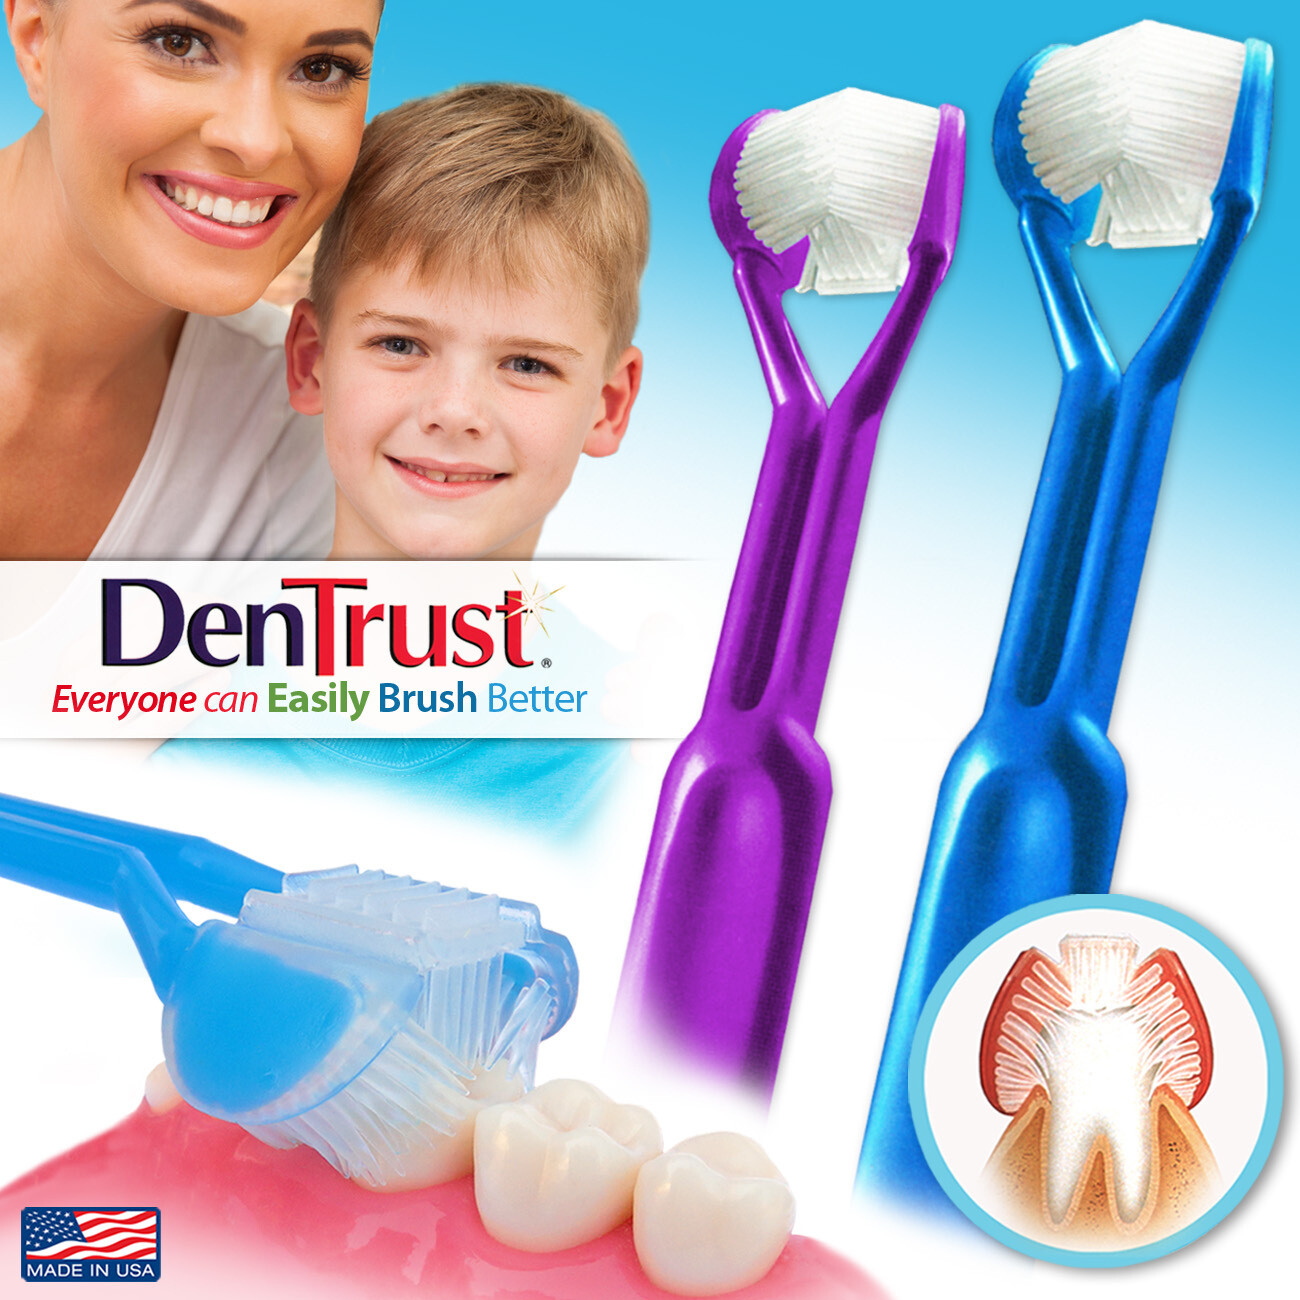 2-PK | DenTrust | The Only Child-Safe 3-SIDED Toothbrush | Made in USA | Easily Brush Better | Clinically Proven | Fast Easy & More Effective for Youth Teens Children Child Special Needs Autism Braces